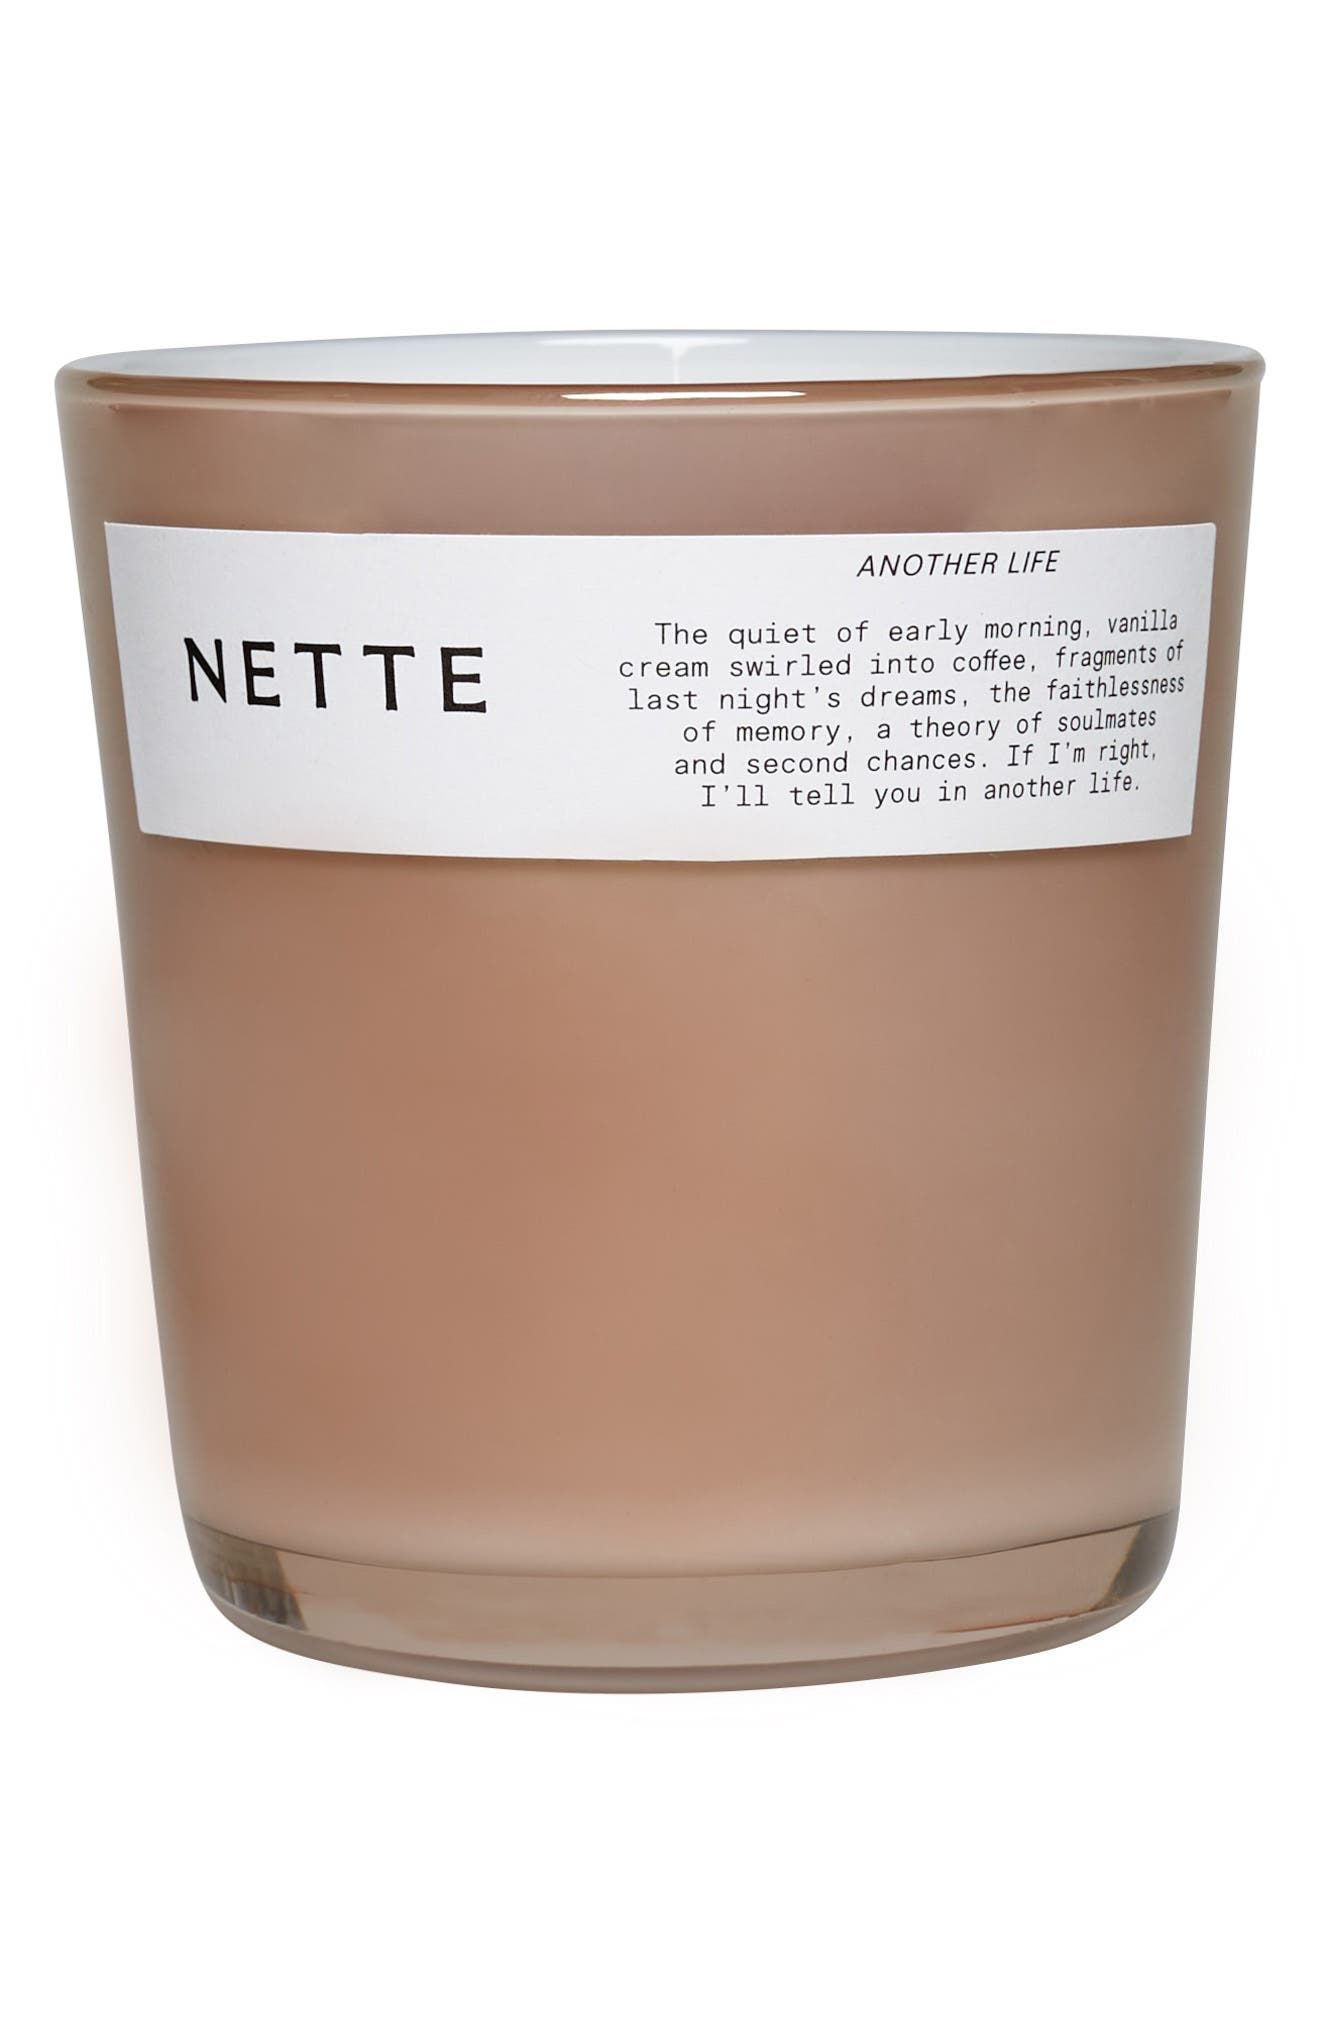 NETTE Another Life Scented Candle at Nordstrom, Size 7.5 Oz